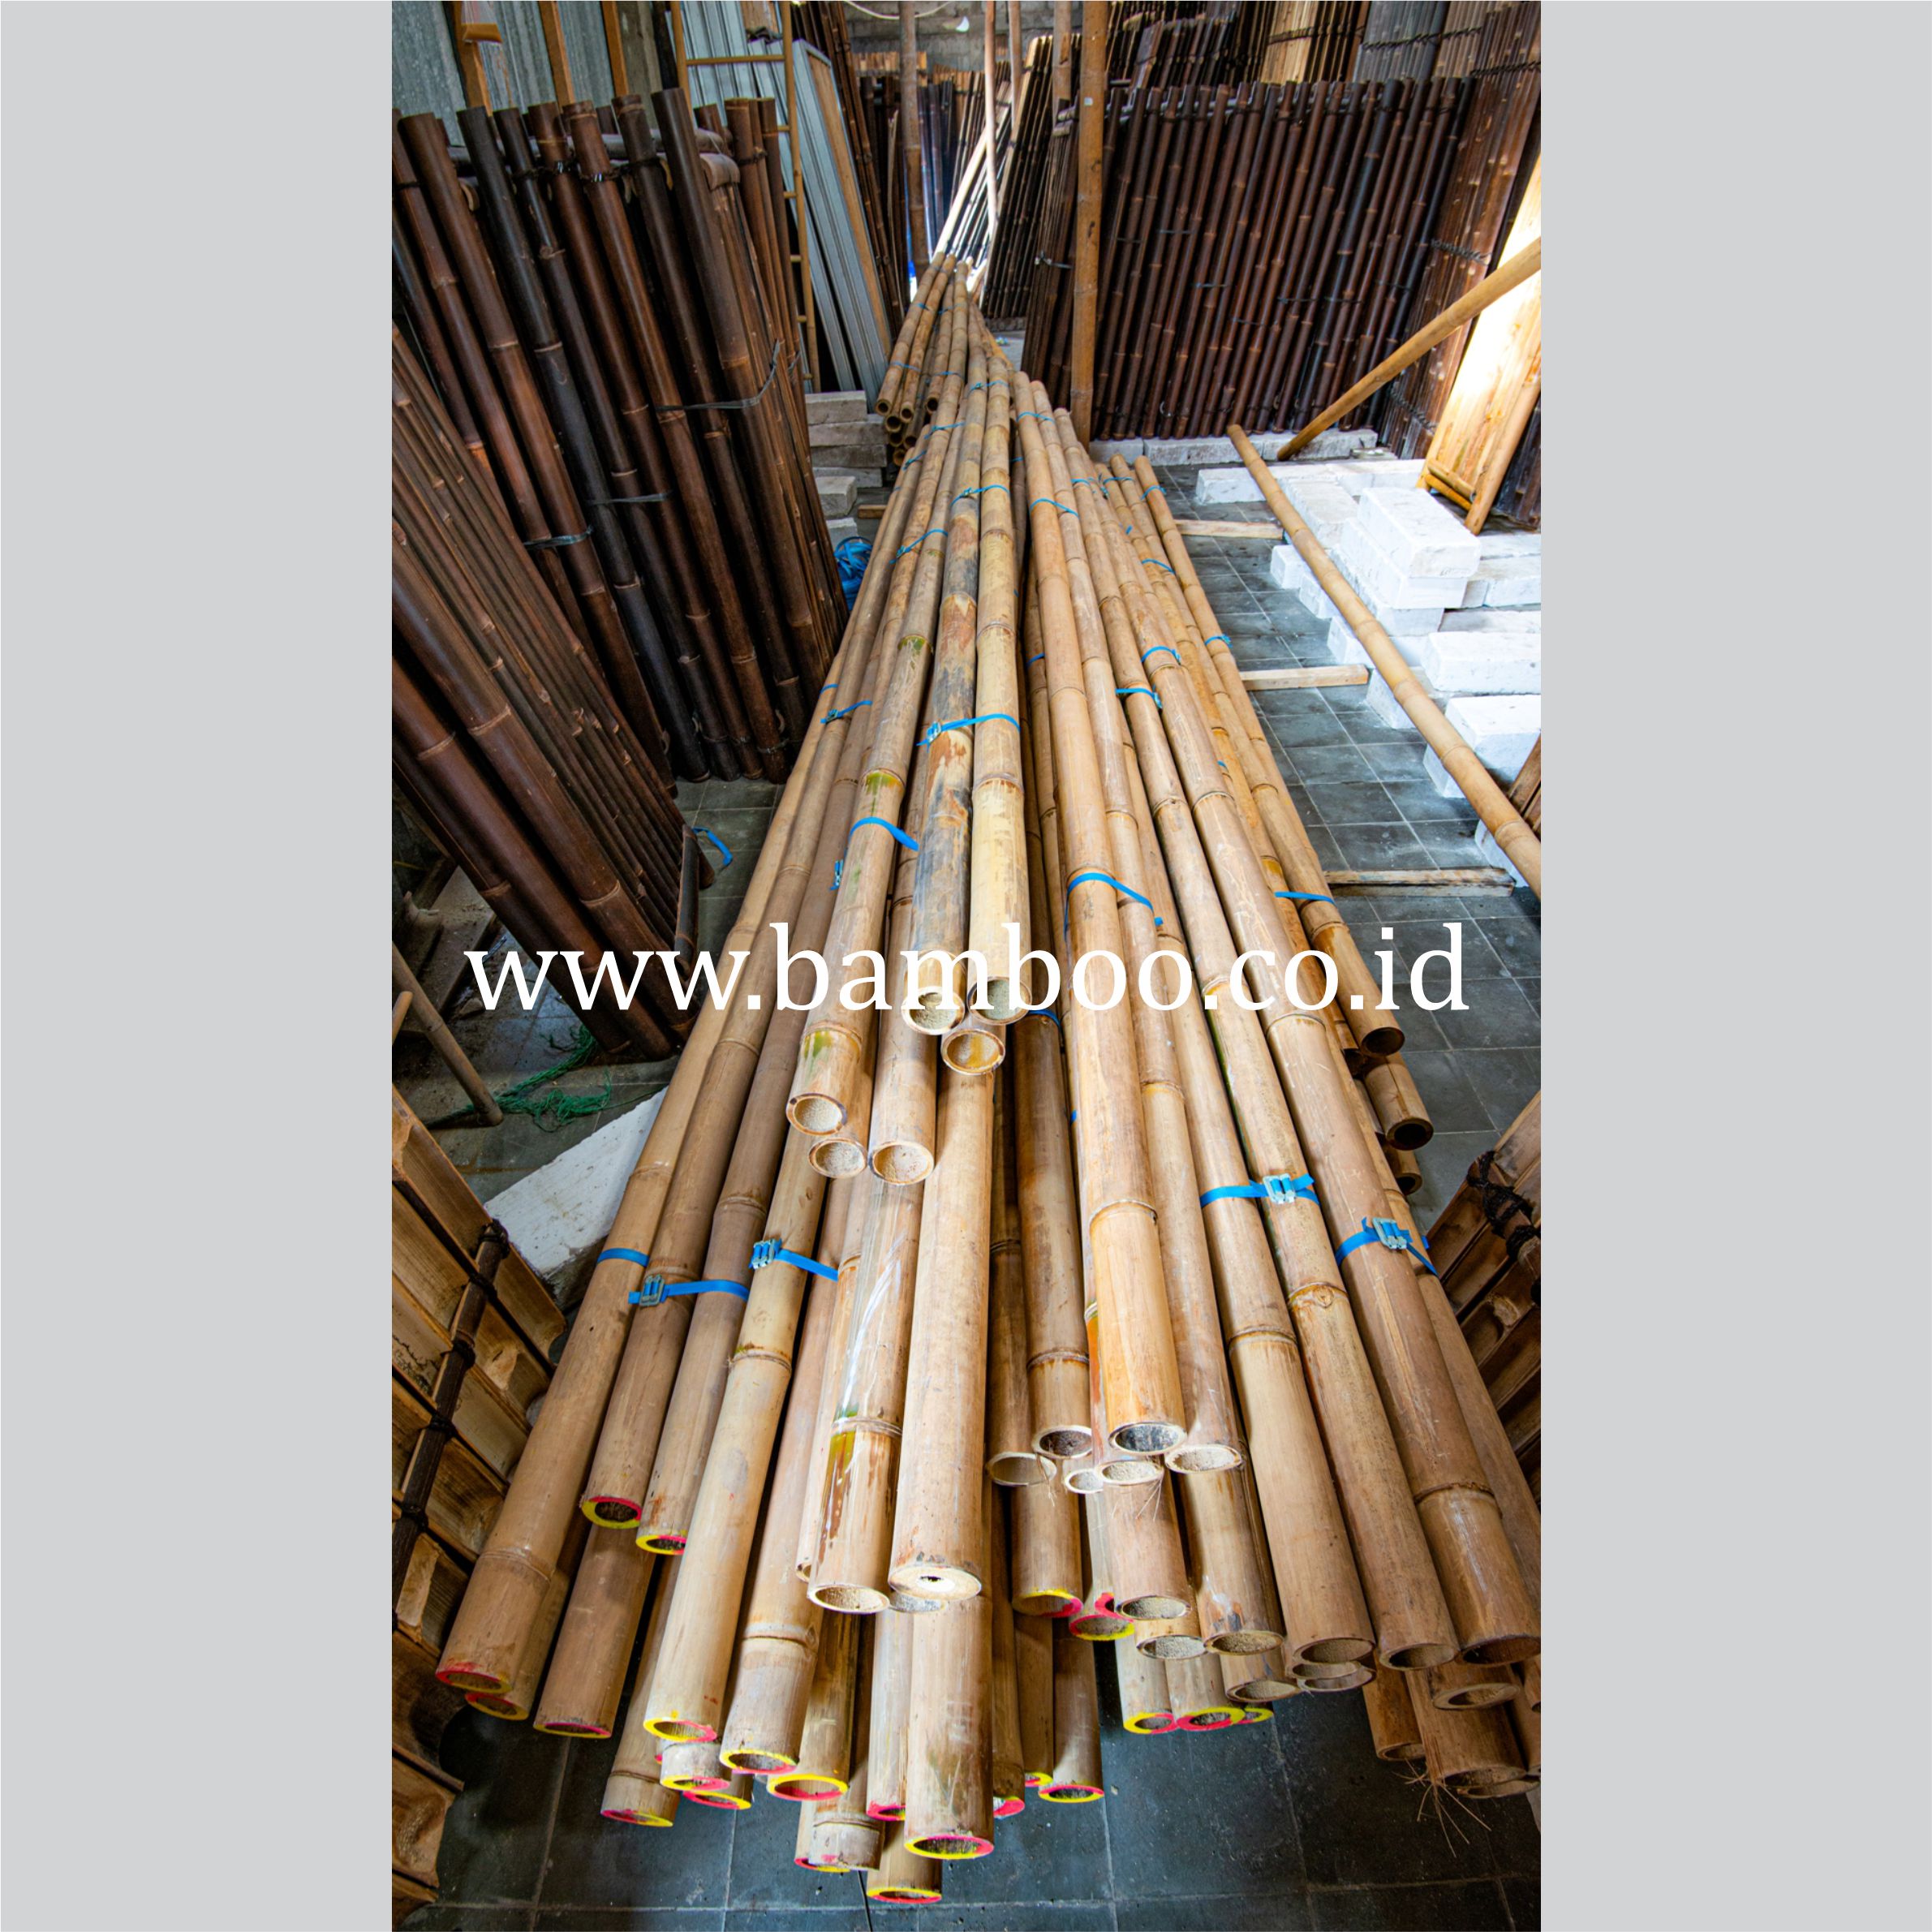 Bamboo Poles for Construction and Home Decor | Natural 2 - 4 Meter Natural Color